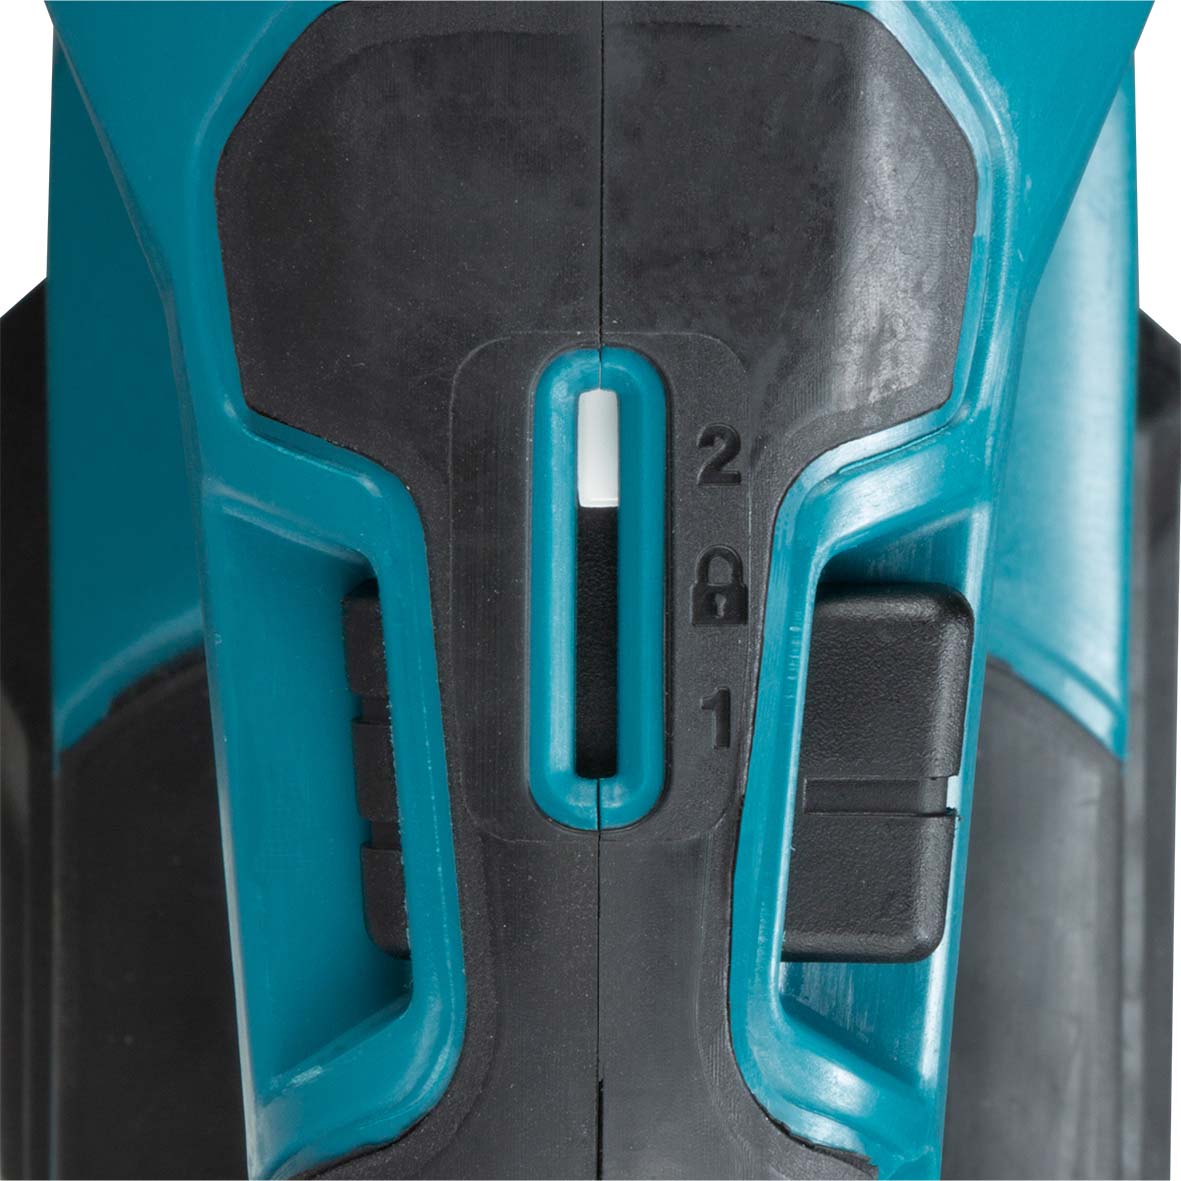 40V Brushless Recipro Saw Bare (Tool Only) JR001GZ by Makita